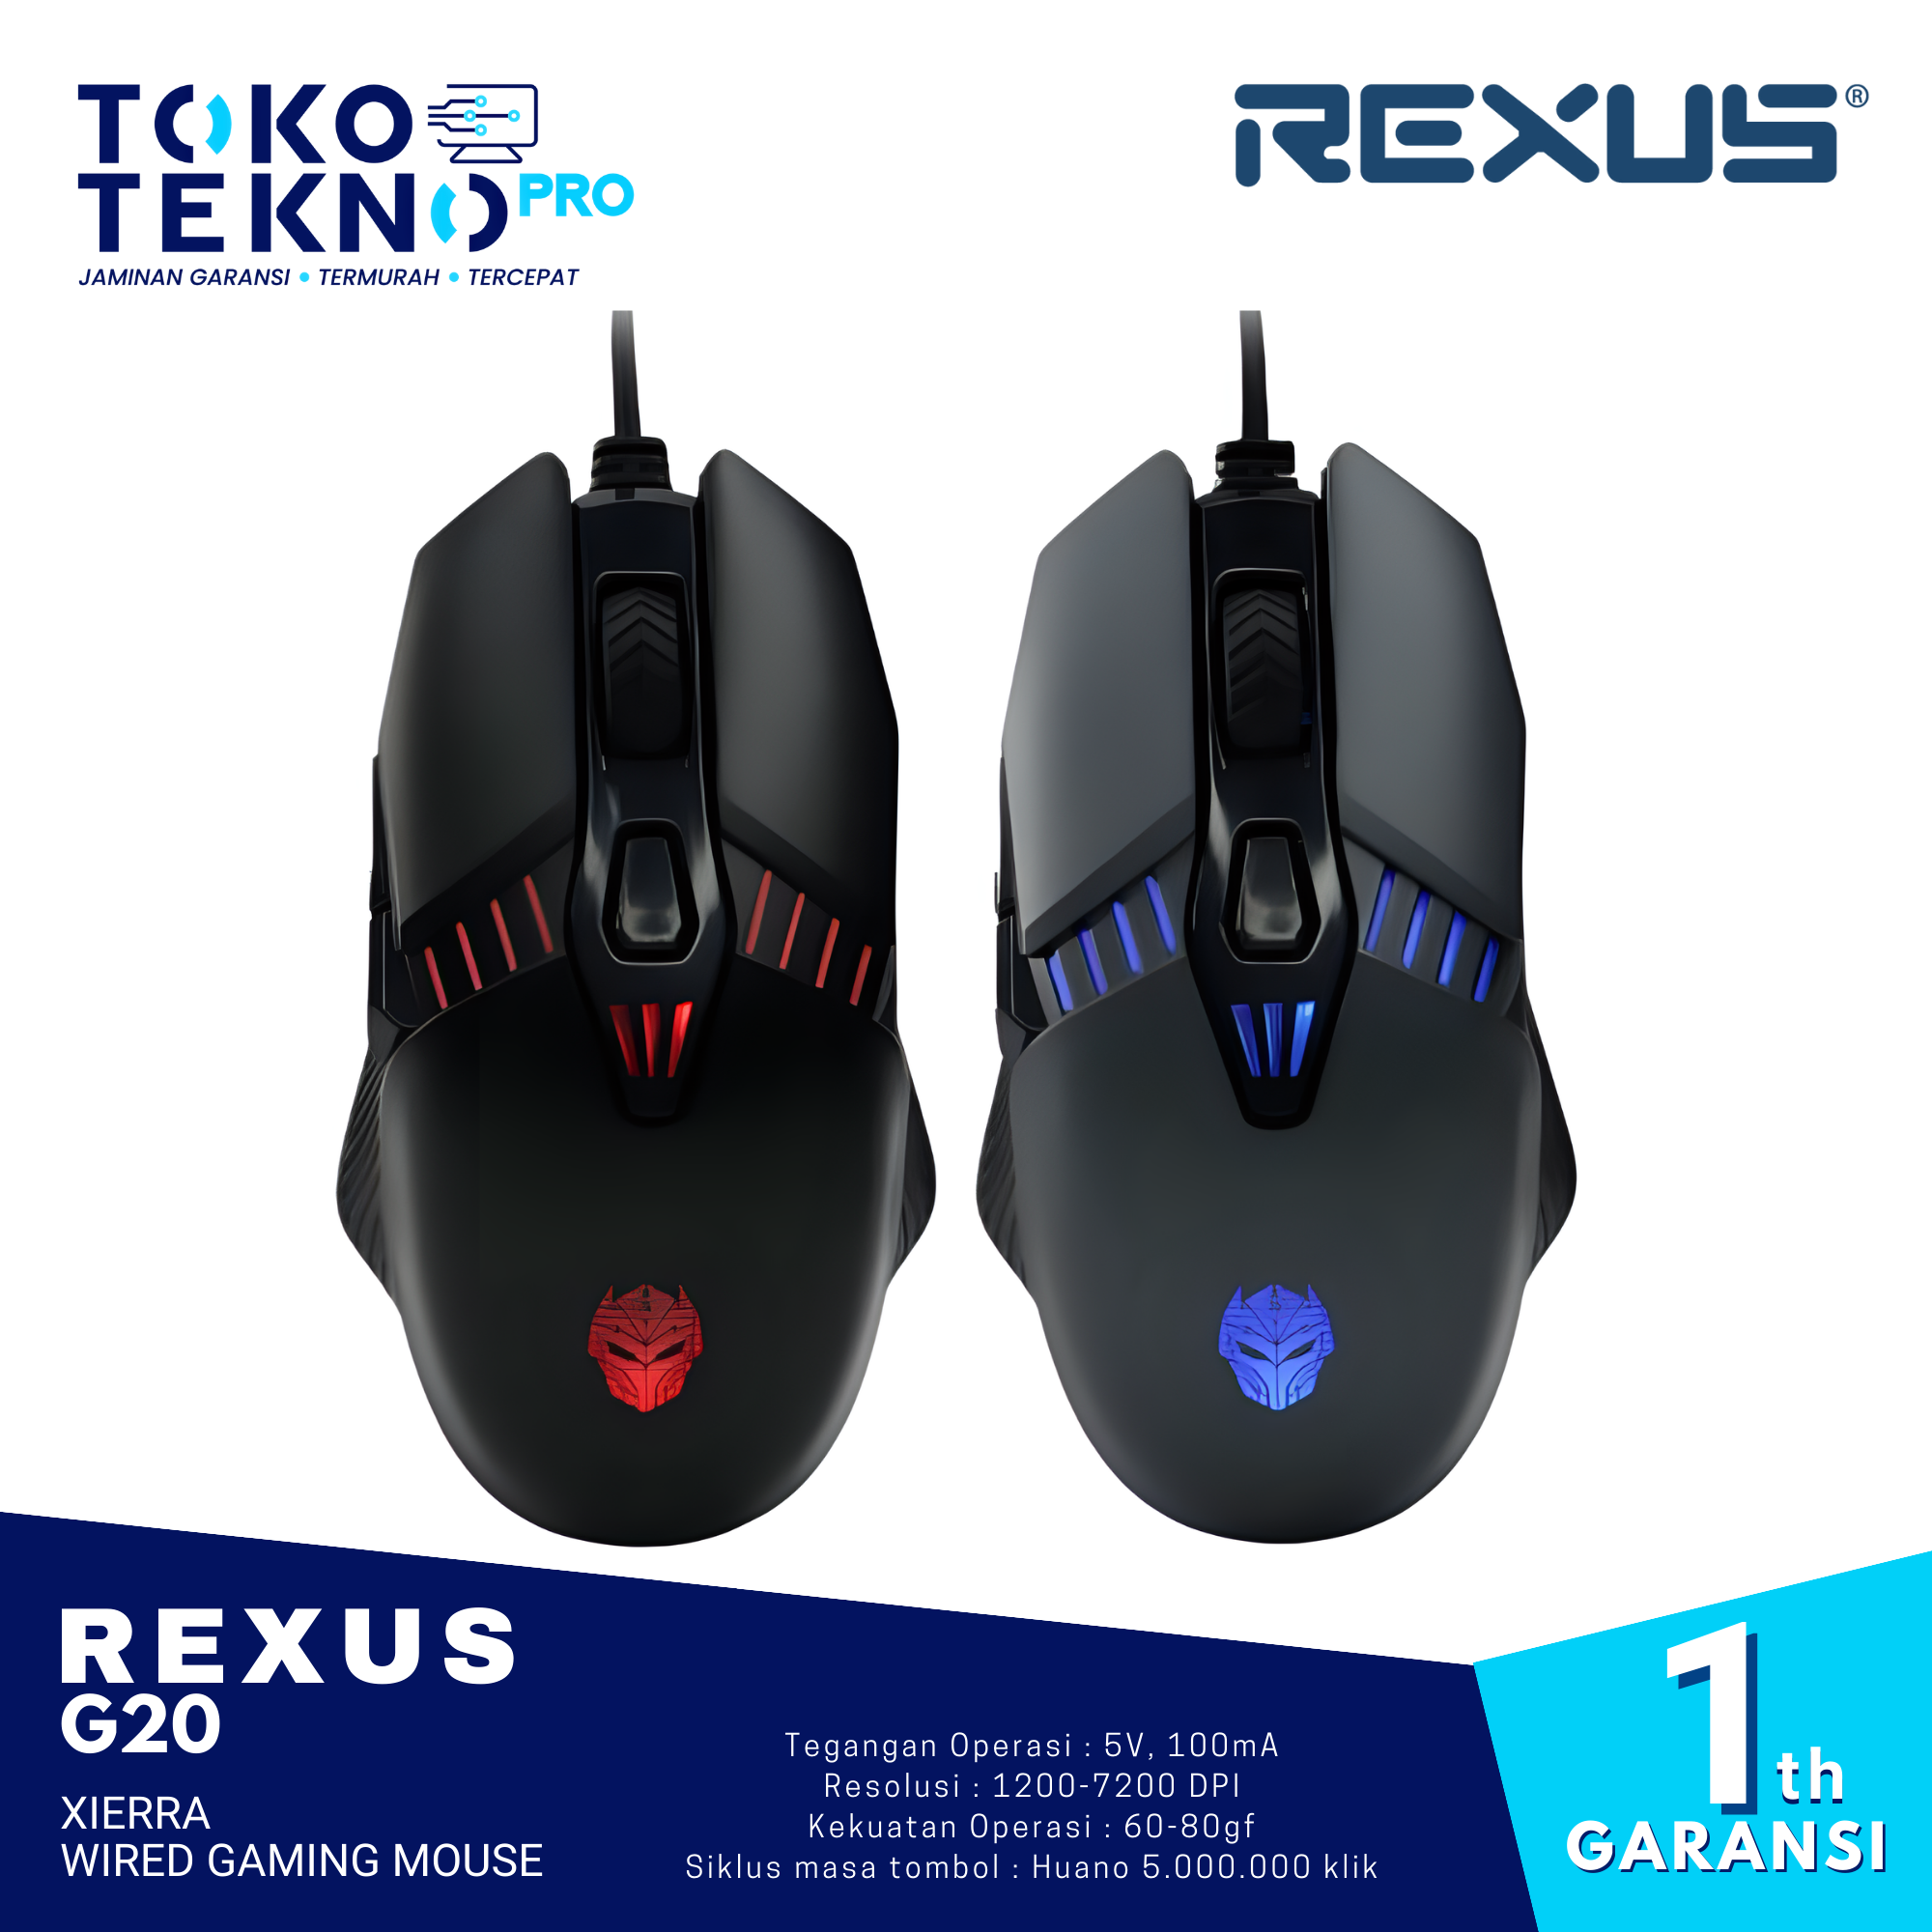 Rexus G20 Xierra Wired Gaming Mouse